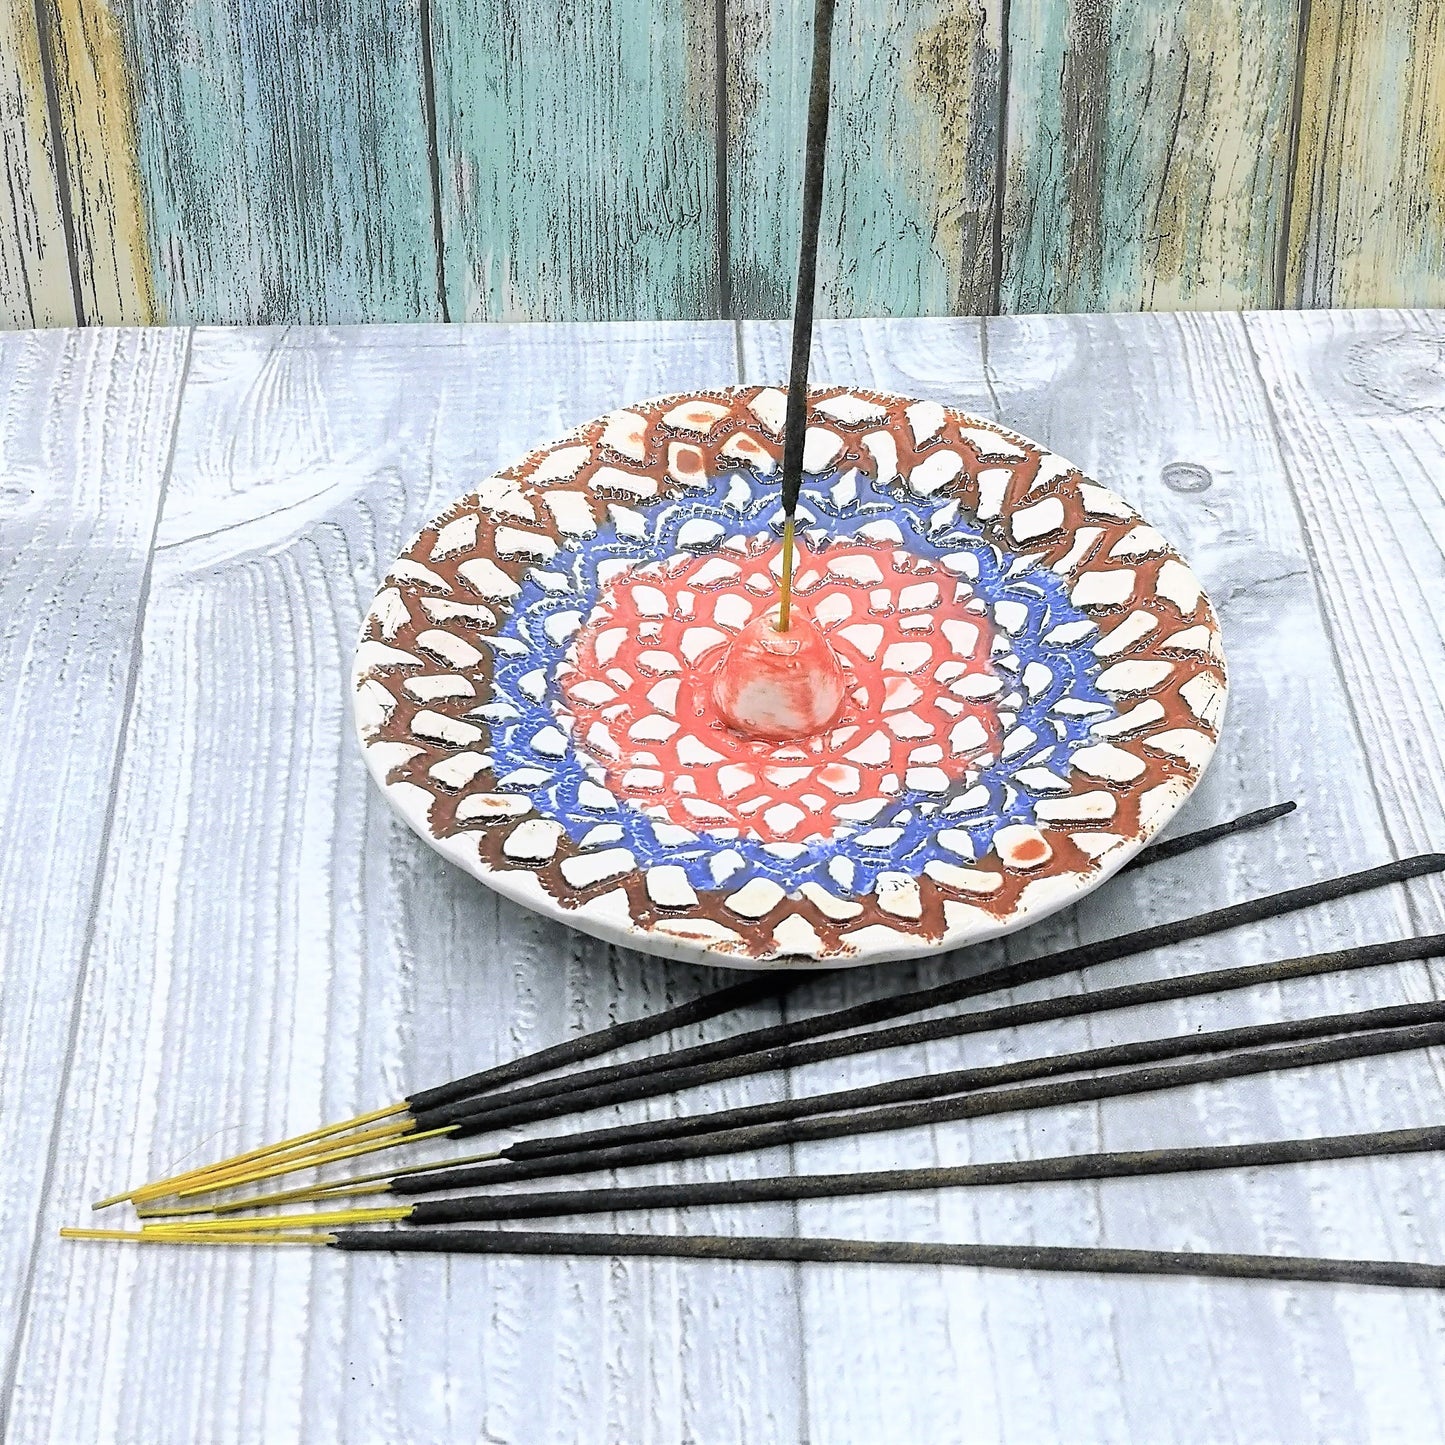 Handmade Ceramic Incense Burner, Incense Stick Holder, Best Friend Gift Ready To Ship, Clay Incense Holder, Mom Birthday Gift From Daughter - Ceramica Ana Rafael